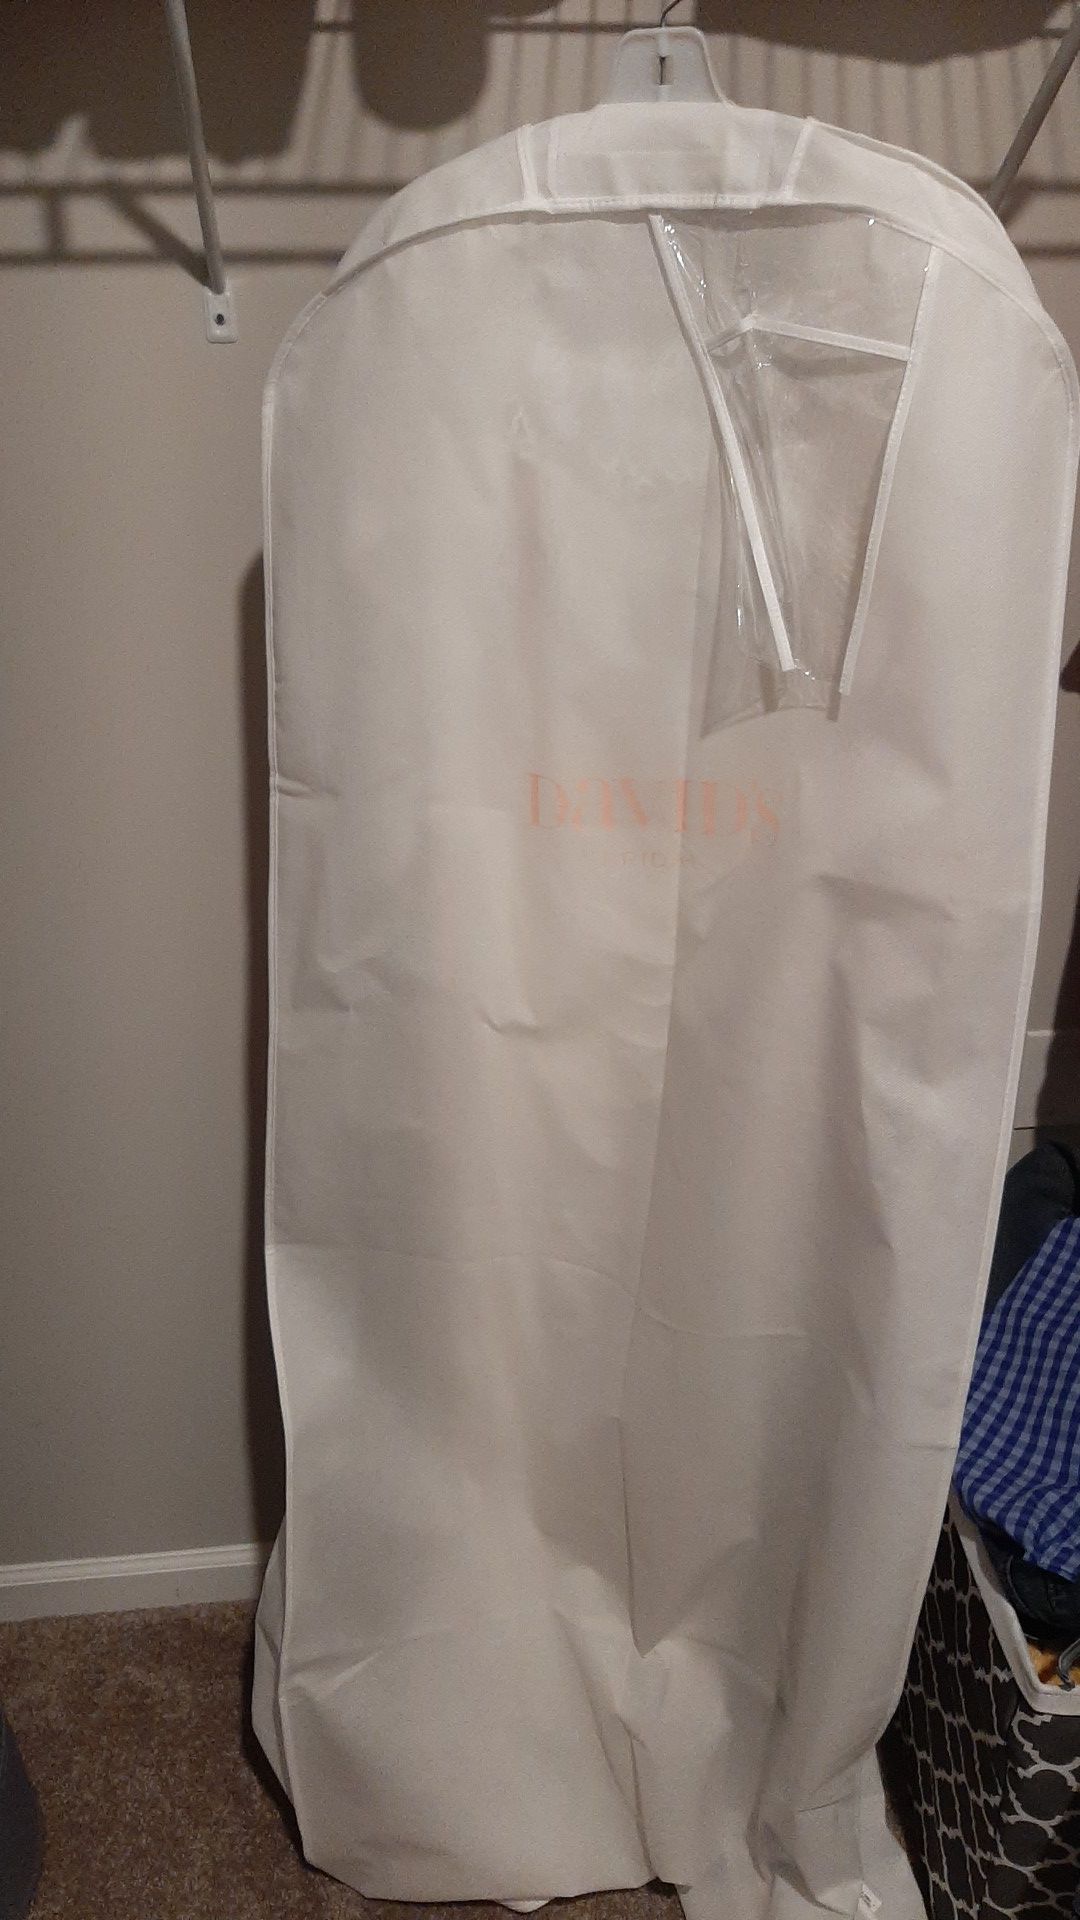 Size 6 wedding dress and shoes. New